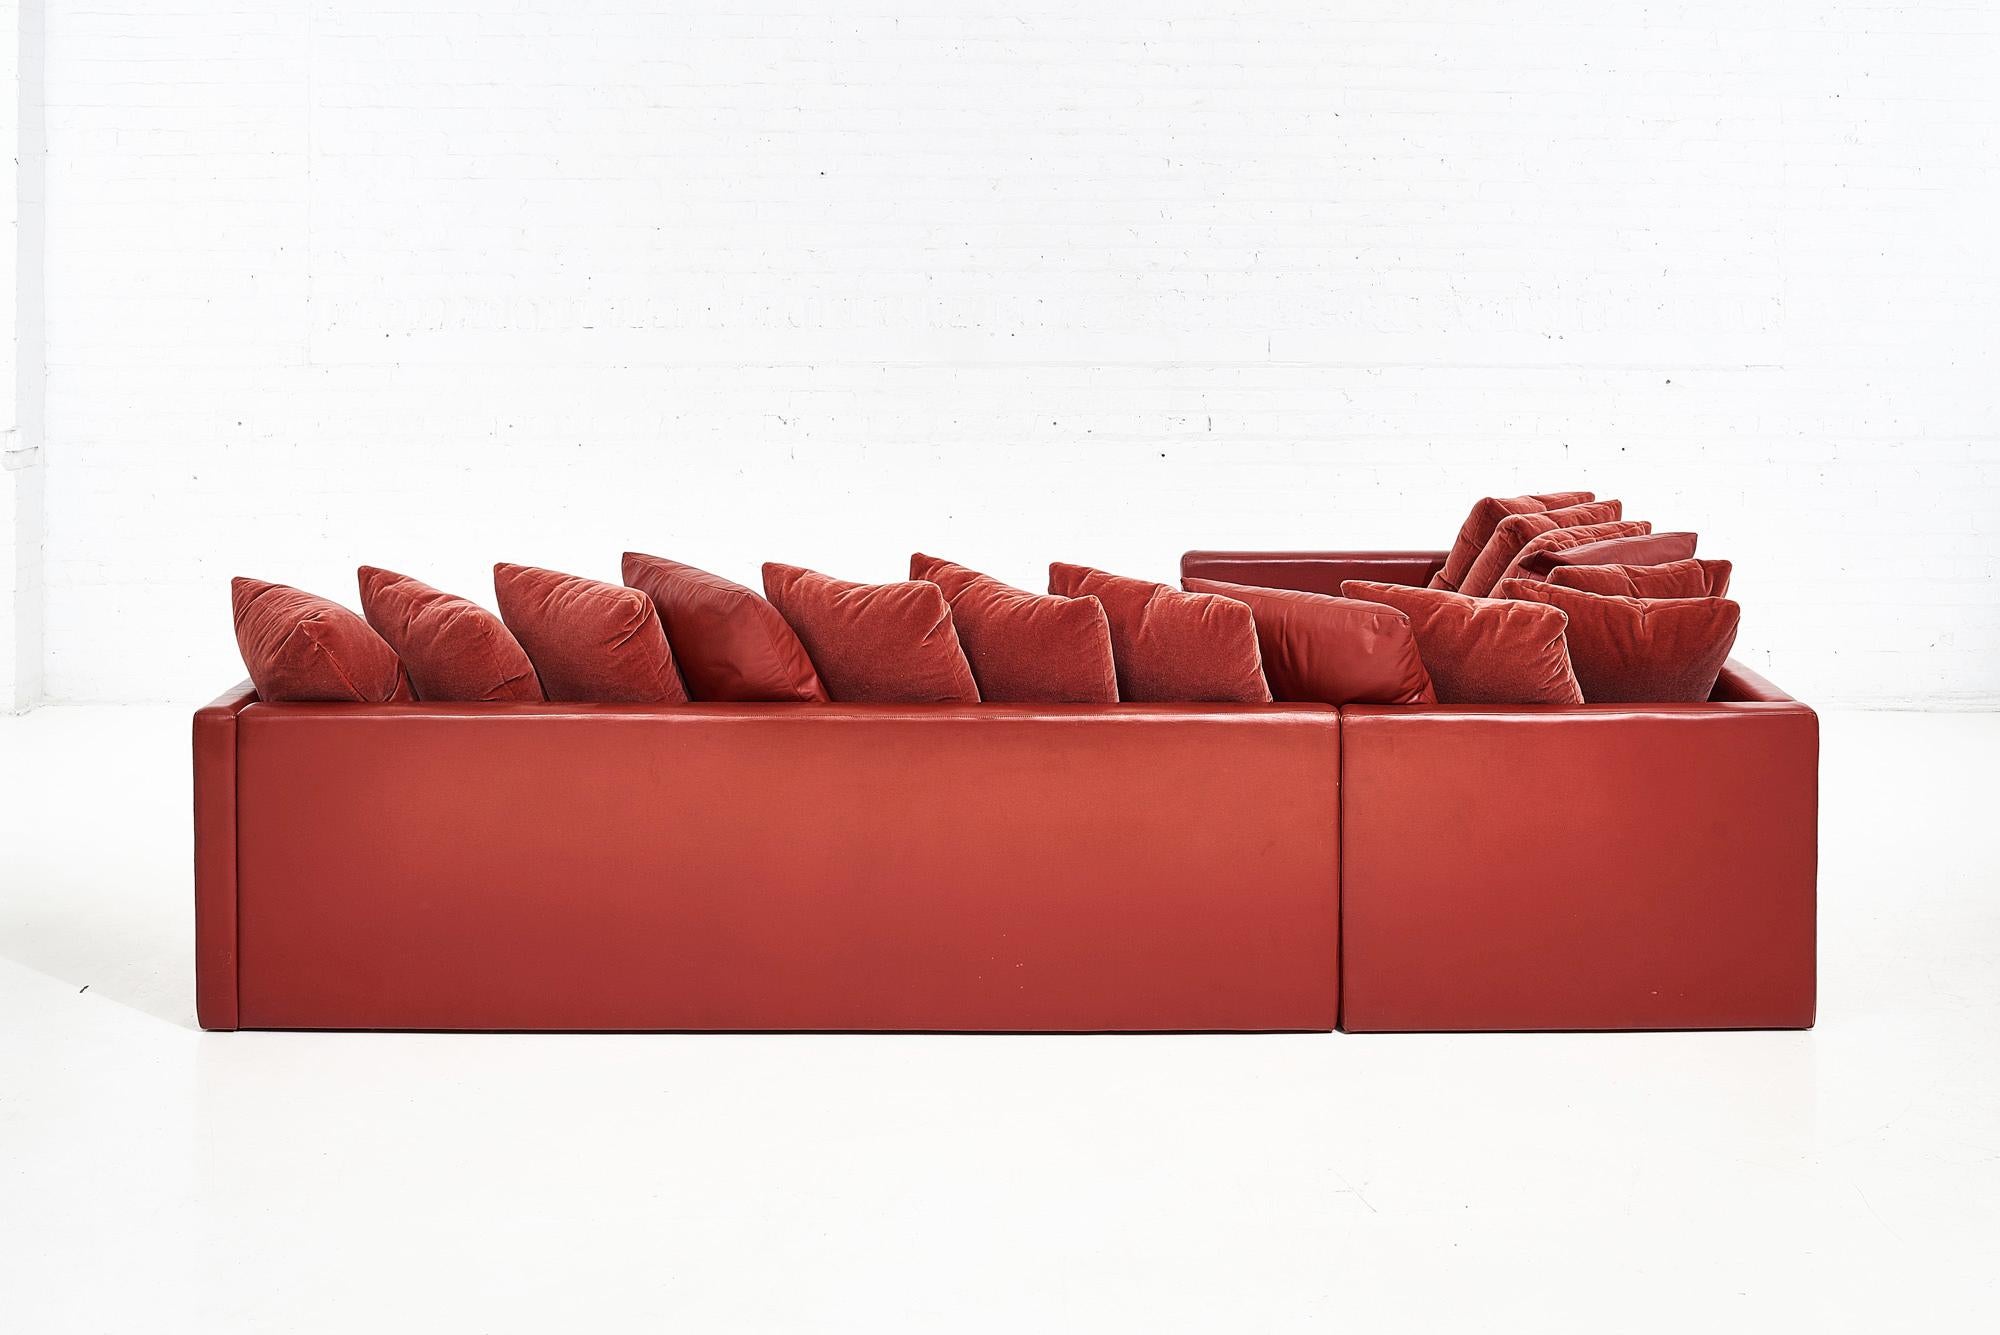 Joseph D'Urso Leather Sectional Sofa, Knoll, 1980 In Good Condition For Sale In Chicago, IL